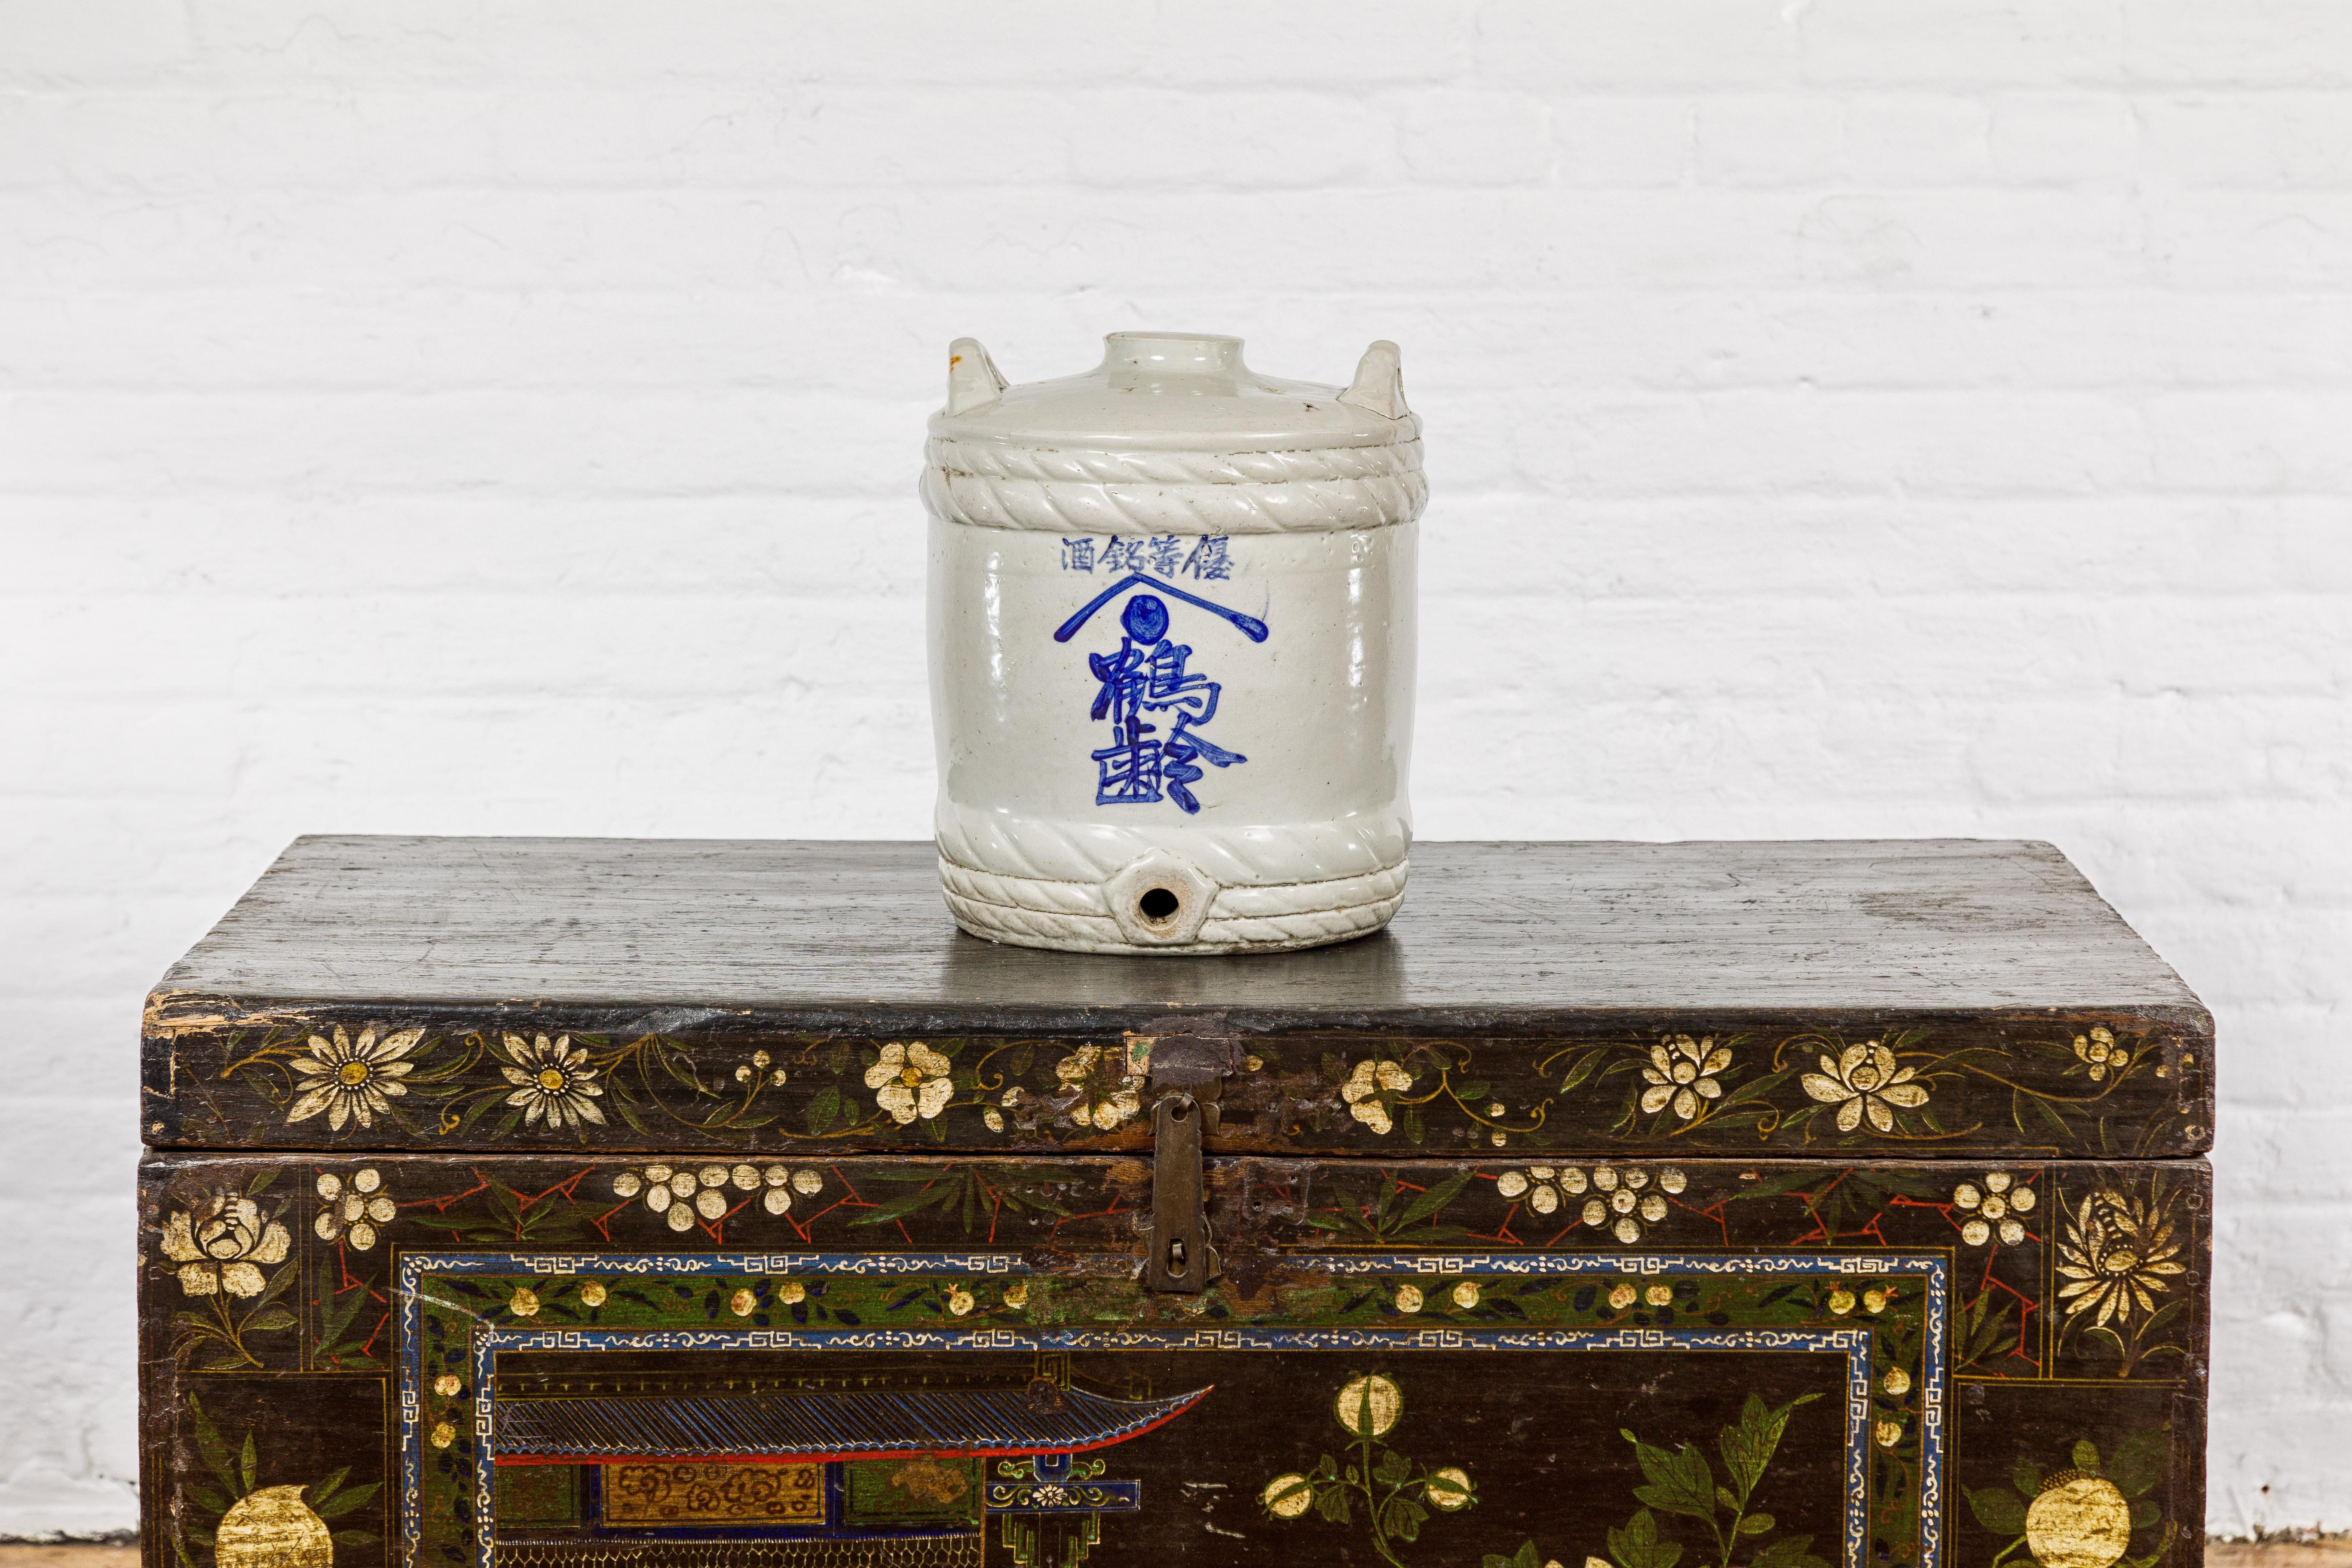 Hand-Painted Japanese Meiji Period 19th Century Barrel Shaped Sake Jar with Calligraphy For Sale